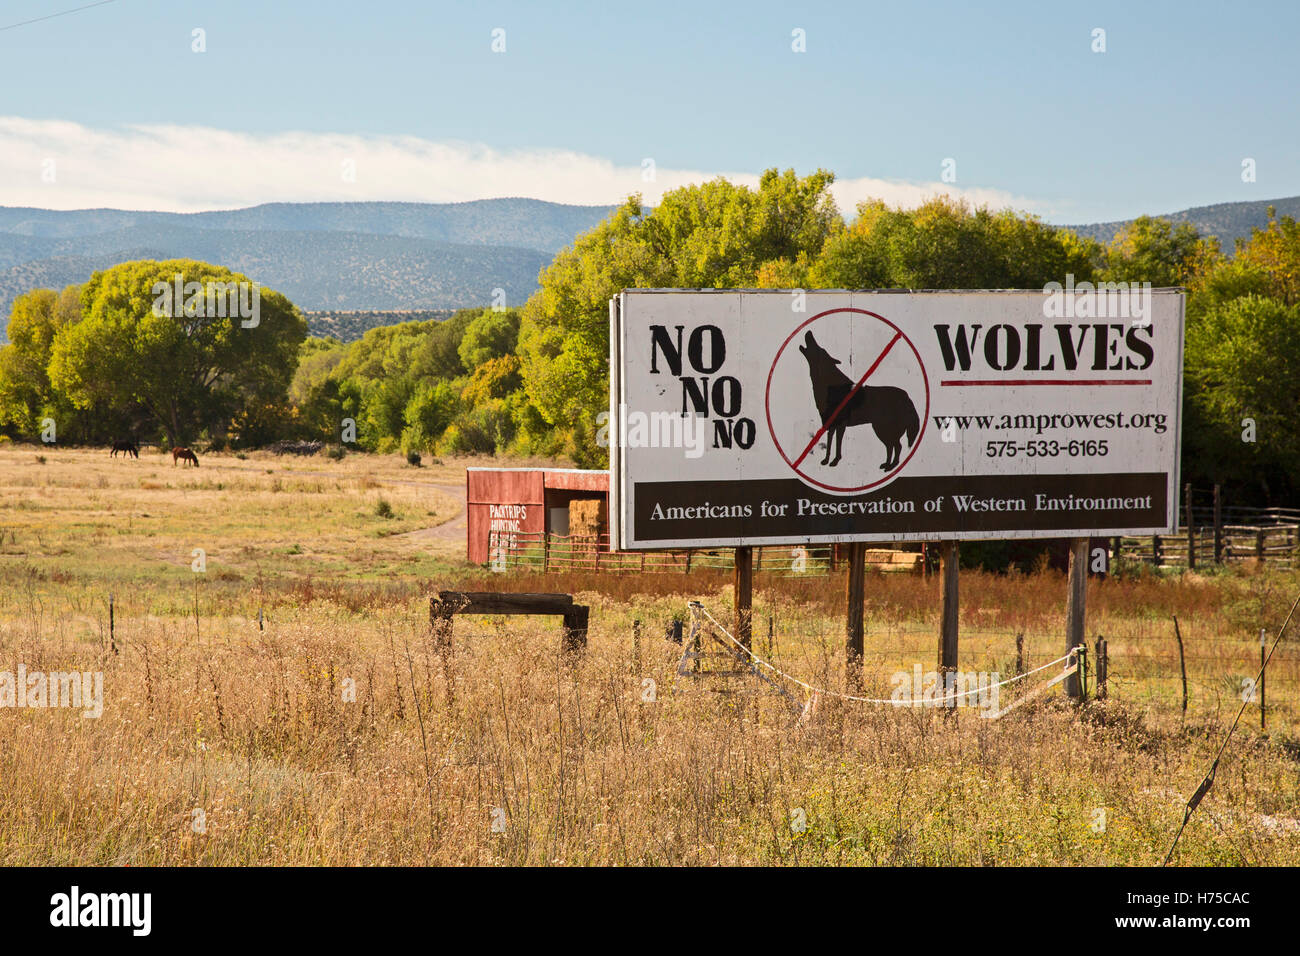 Alma, New Mexico - A sign in southwestern New Mexico opposes the reintroduction of the Mexican Gray Wolf. Stock Photo